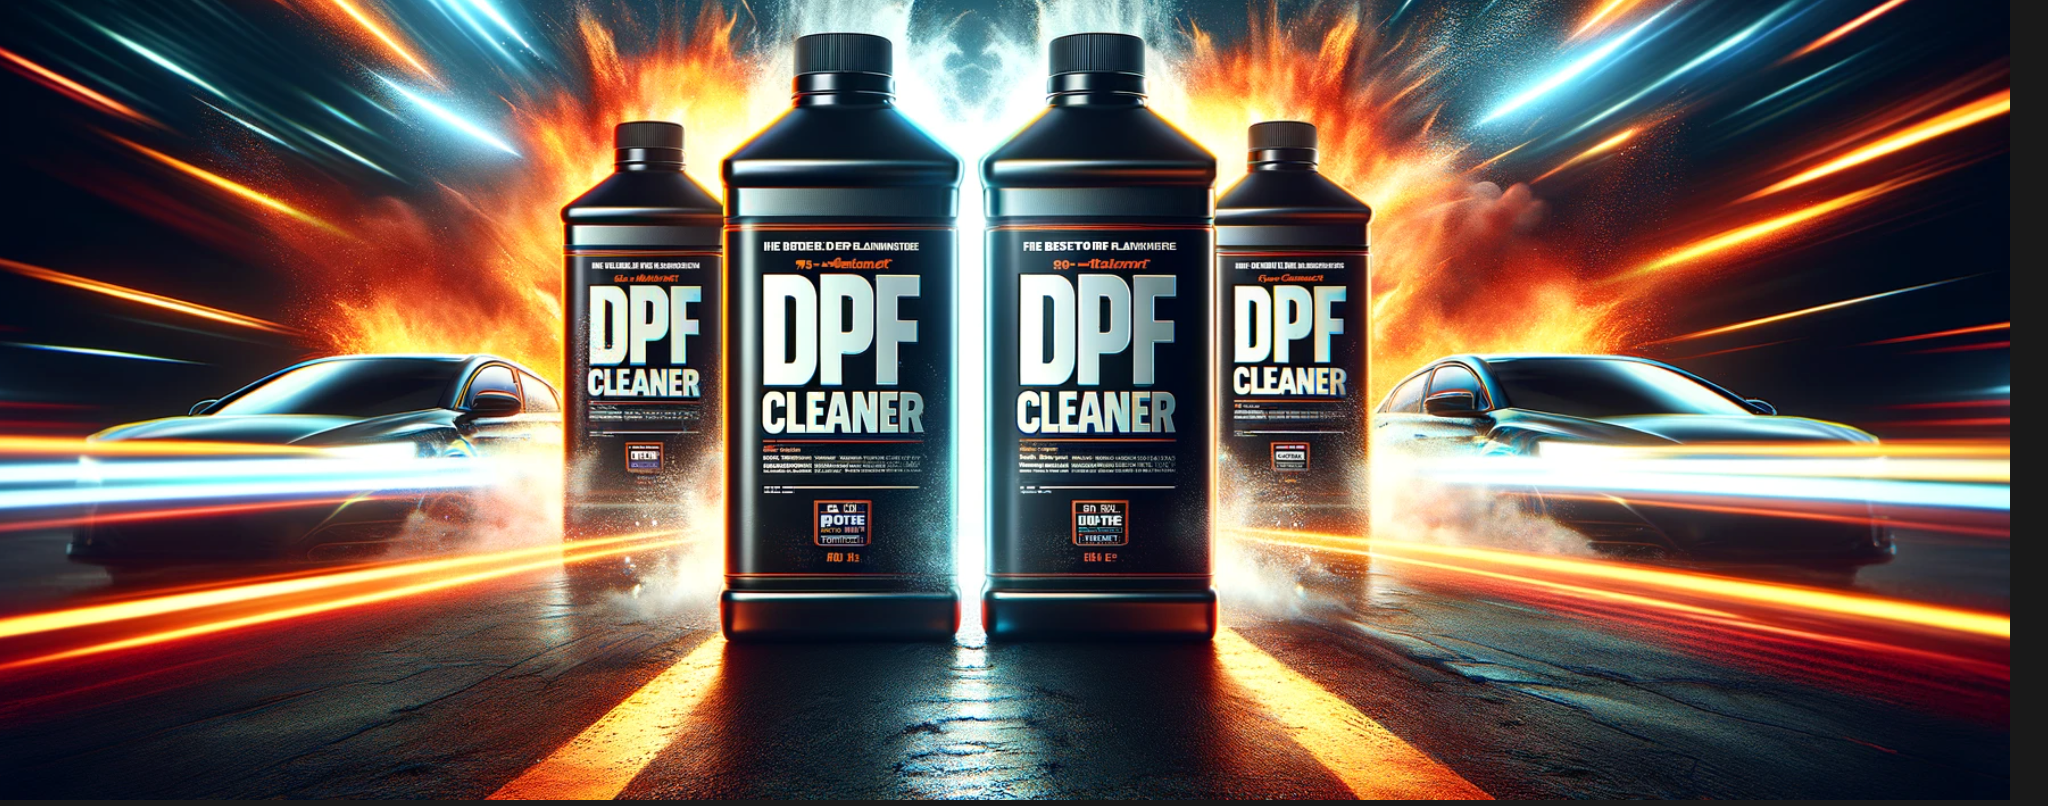 What is the Best DPF Cleaner and Does DPF Cleaner Work? - Our Recommendations